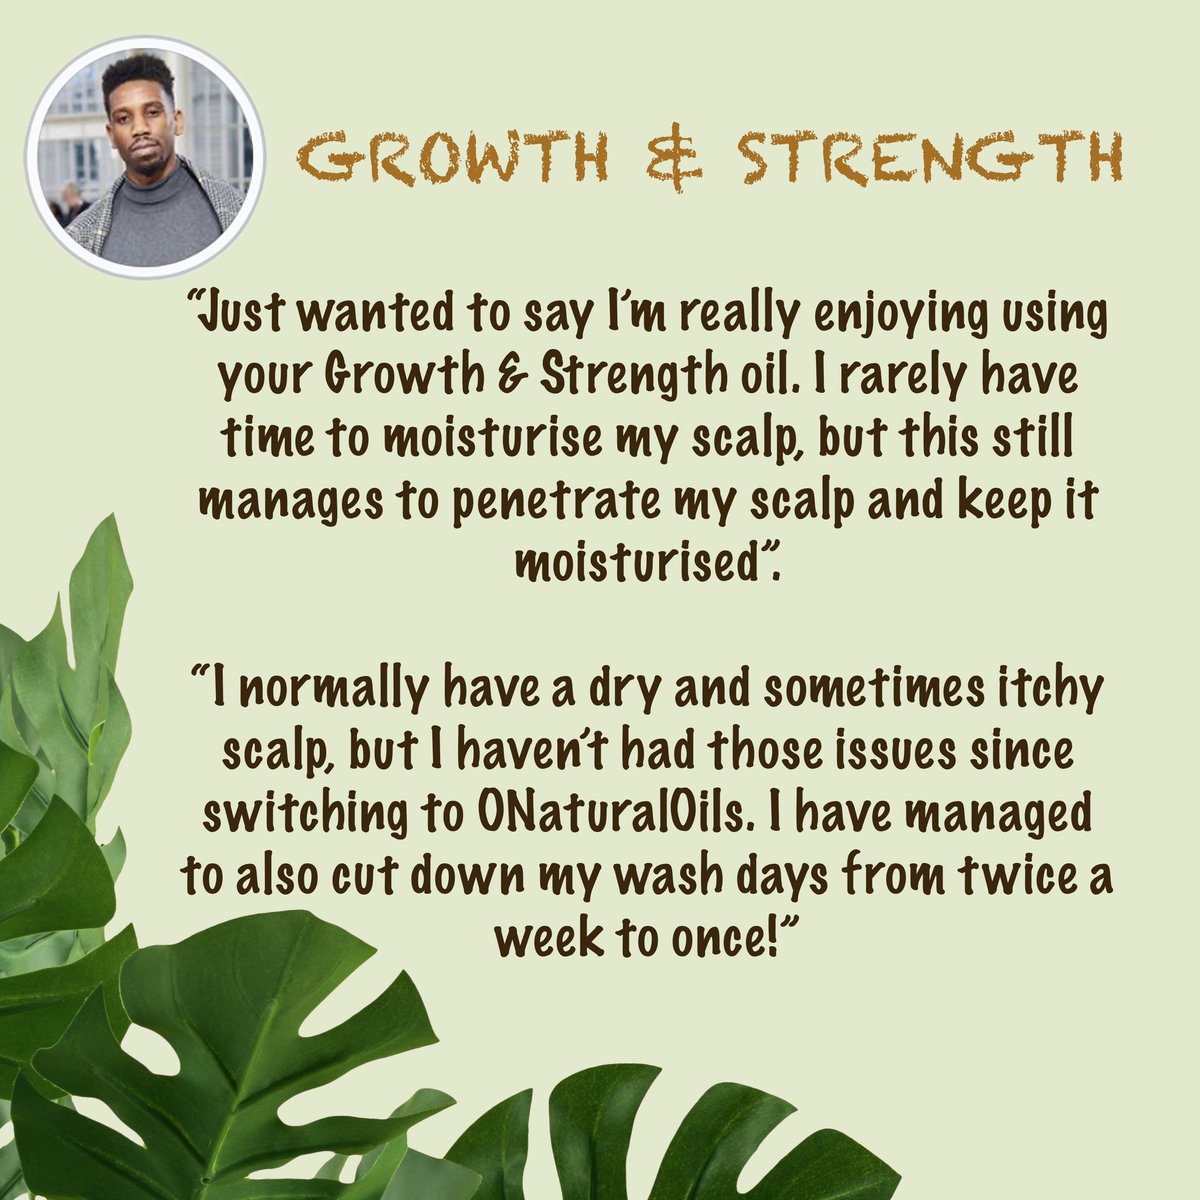 Growth & Strength product review from @MrJsmash 
We love to see positive feedback! ❤️
#onaturaloils #hairoils #castoroil #arganoil #naturalhairgrowth #afrohairtips #hairgrowthoil #itchyscalp #dryscalp #hairproductreview #naturalhairproducts #coilyhair #curlyhair